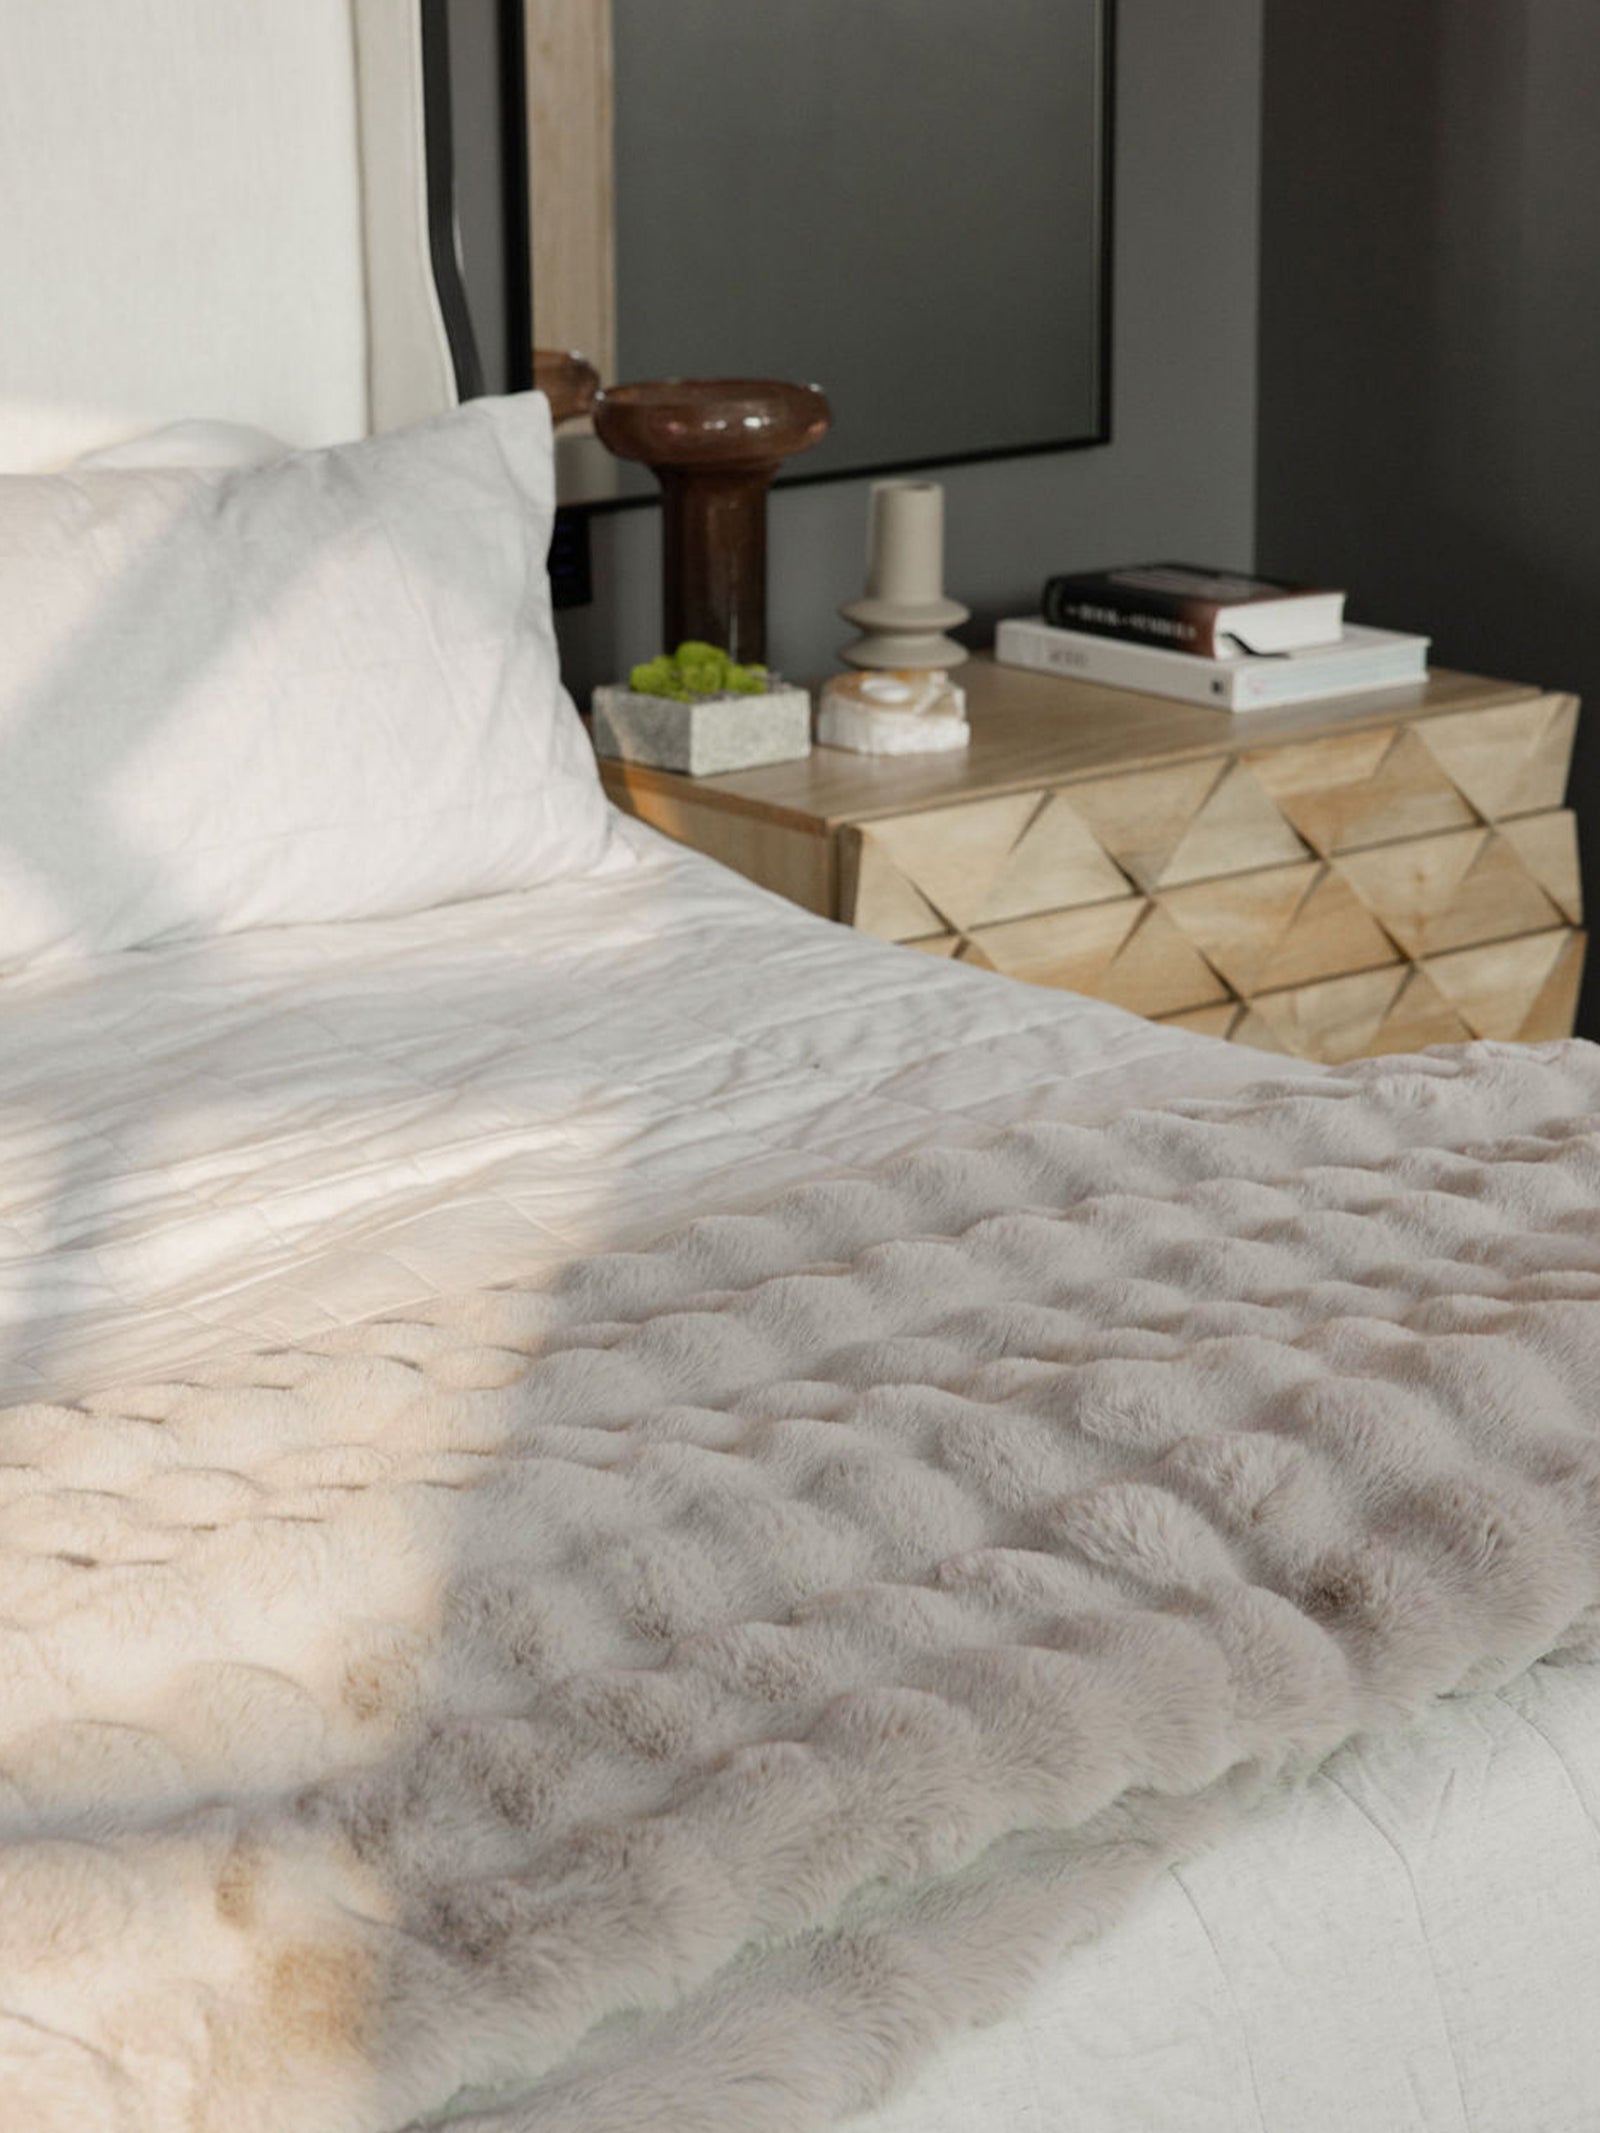 Light grey lush faux fur blanket draped over bed with white bedding 